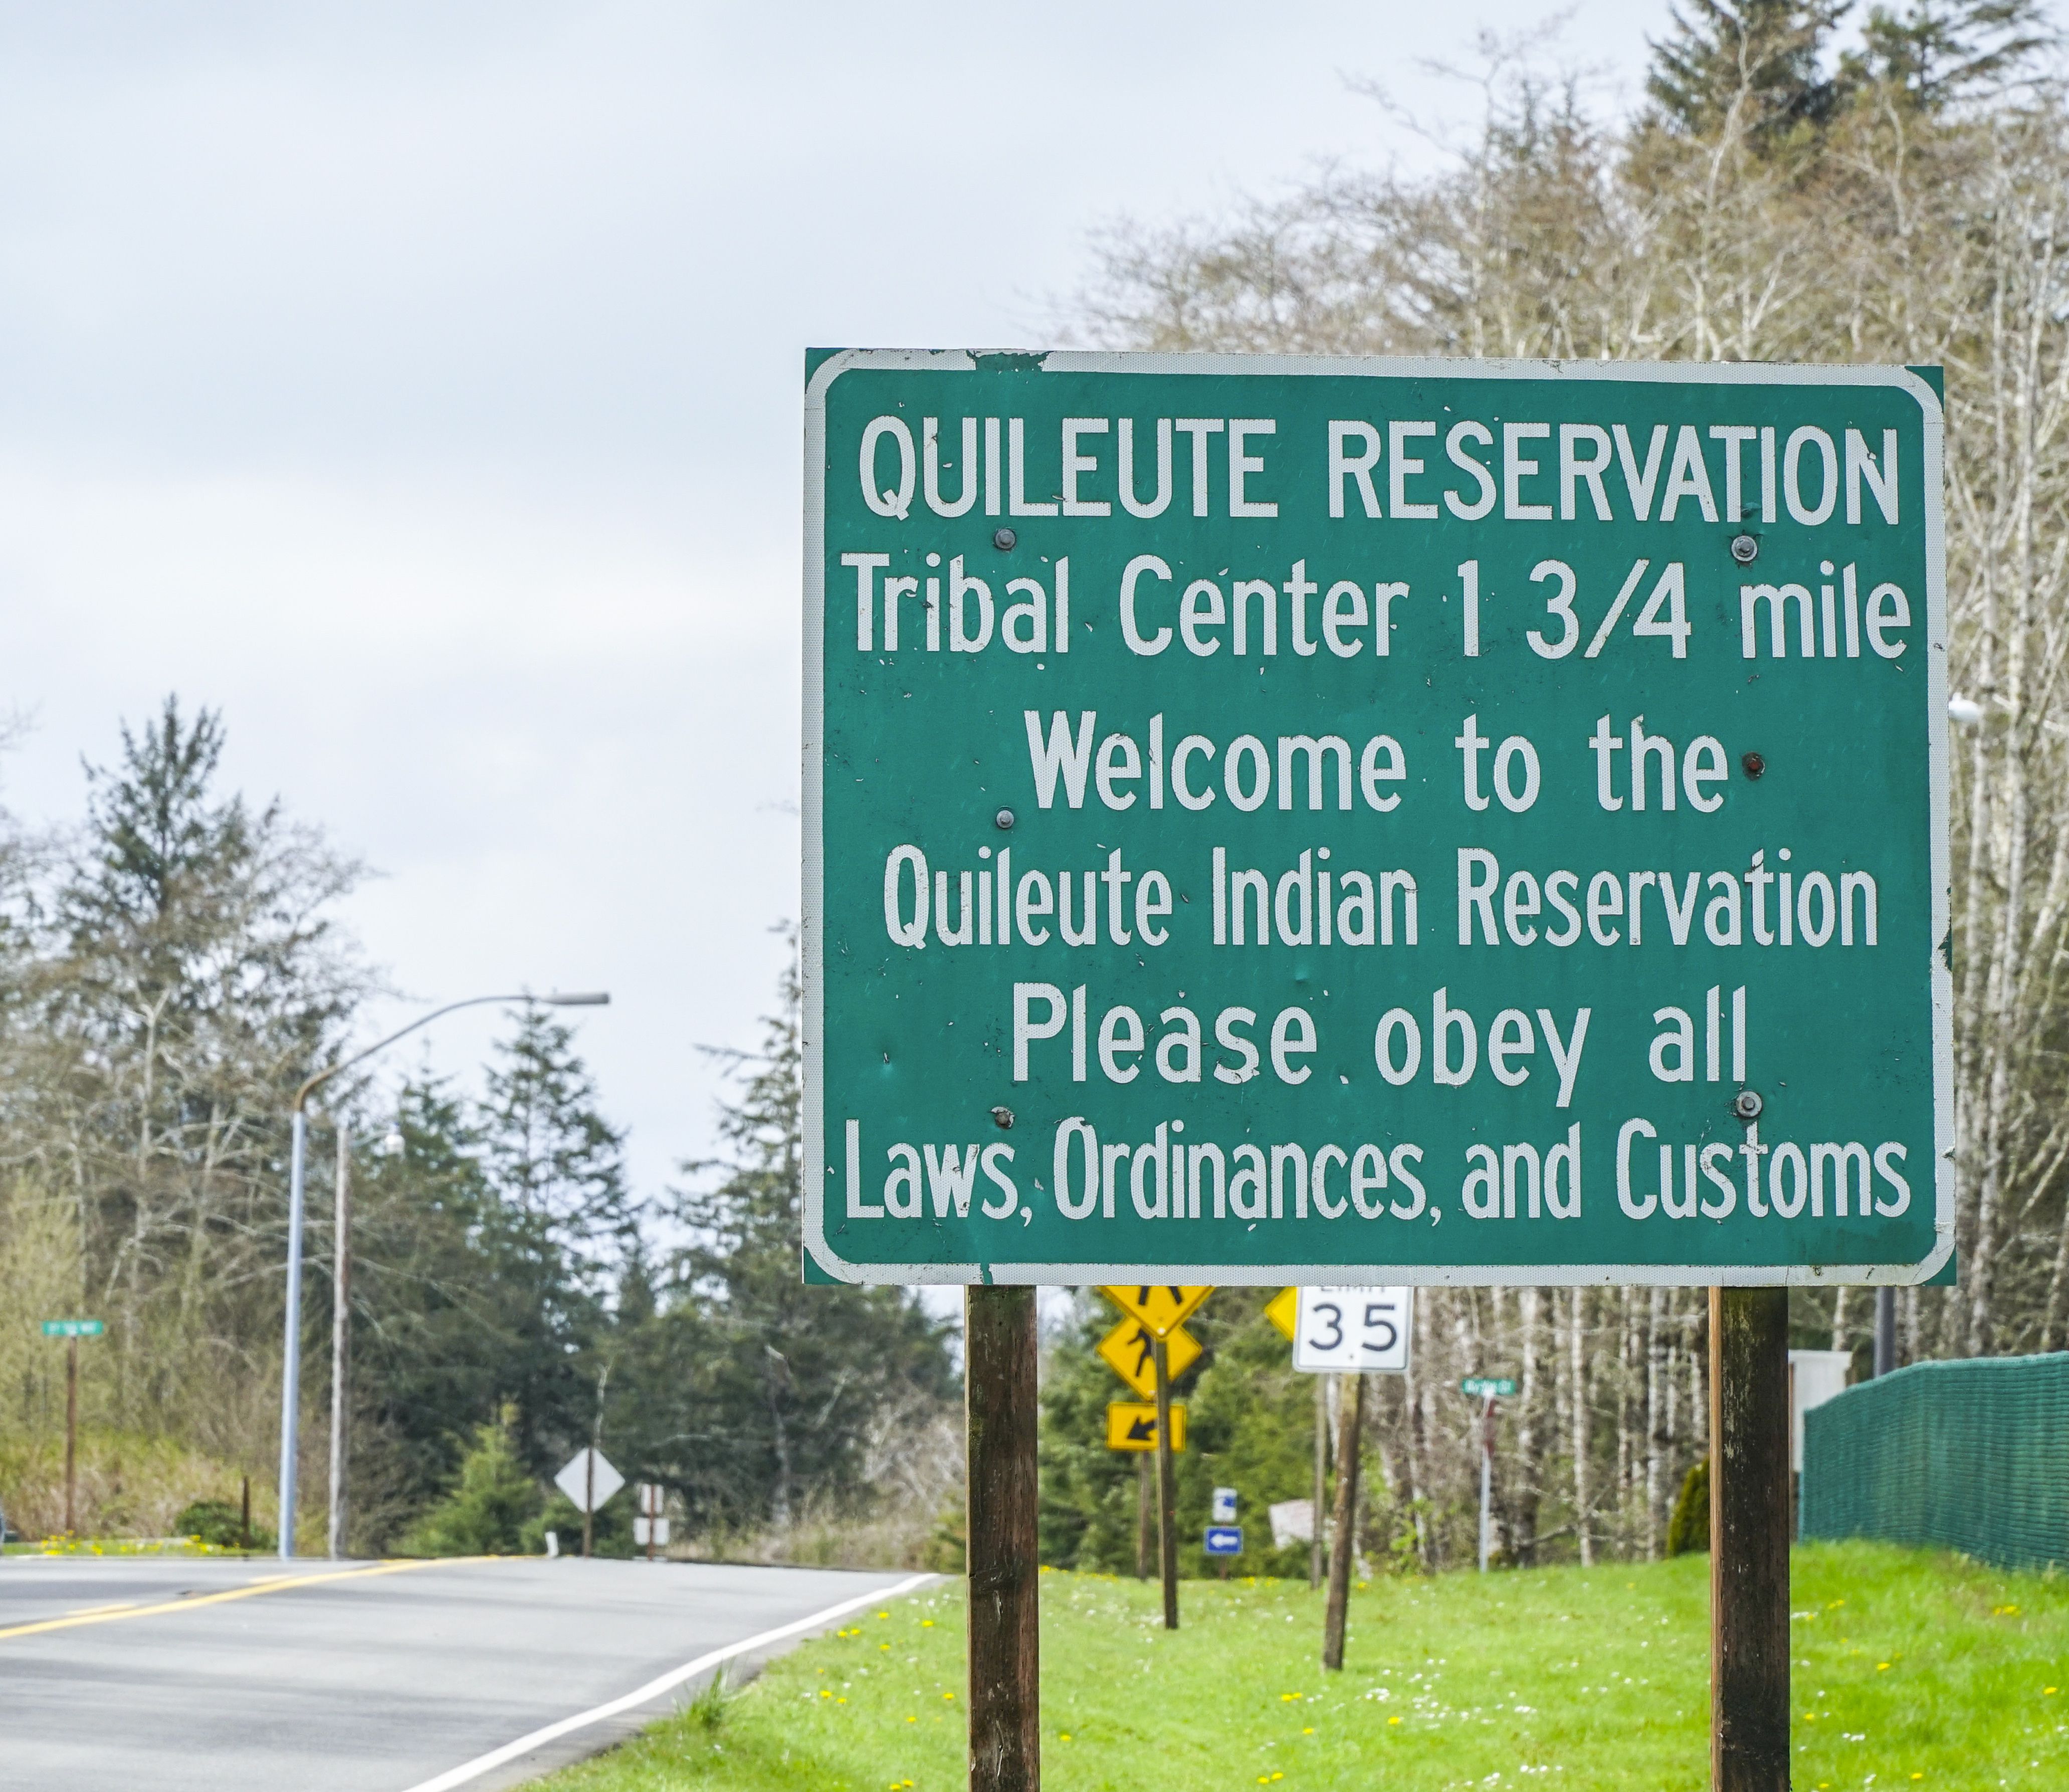 A sign for the Quileute Reservation in Forks, Washington